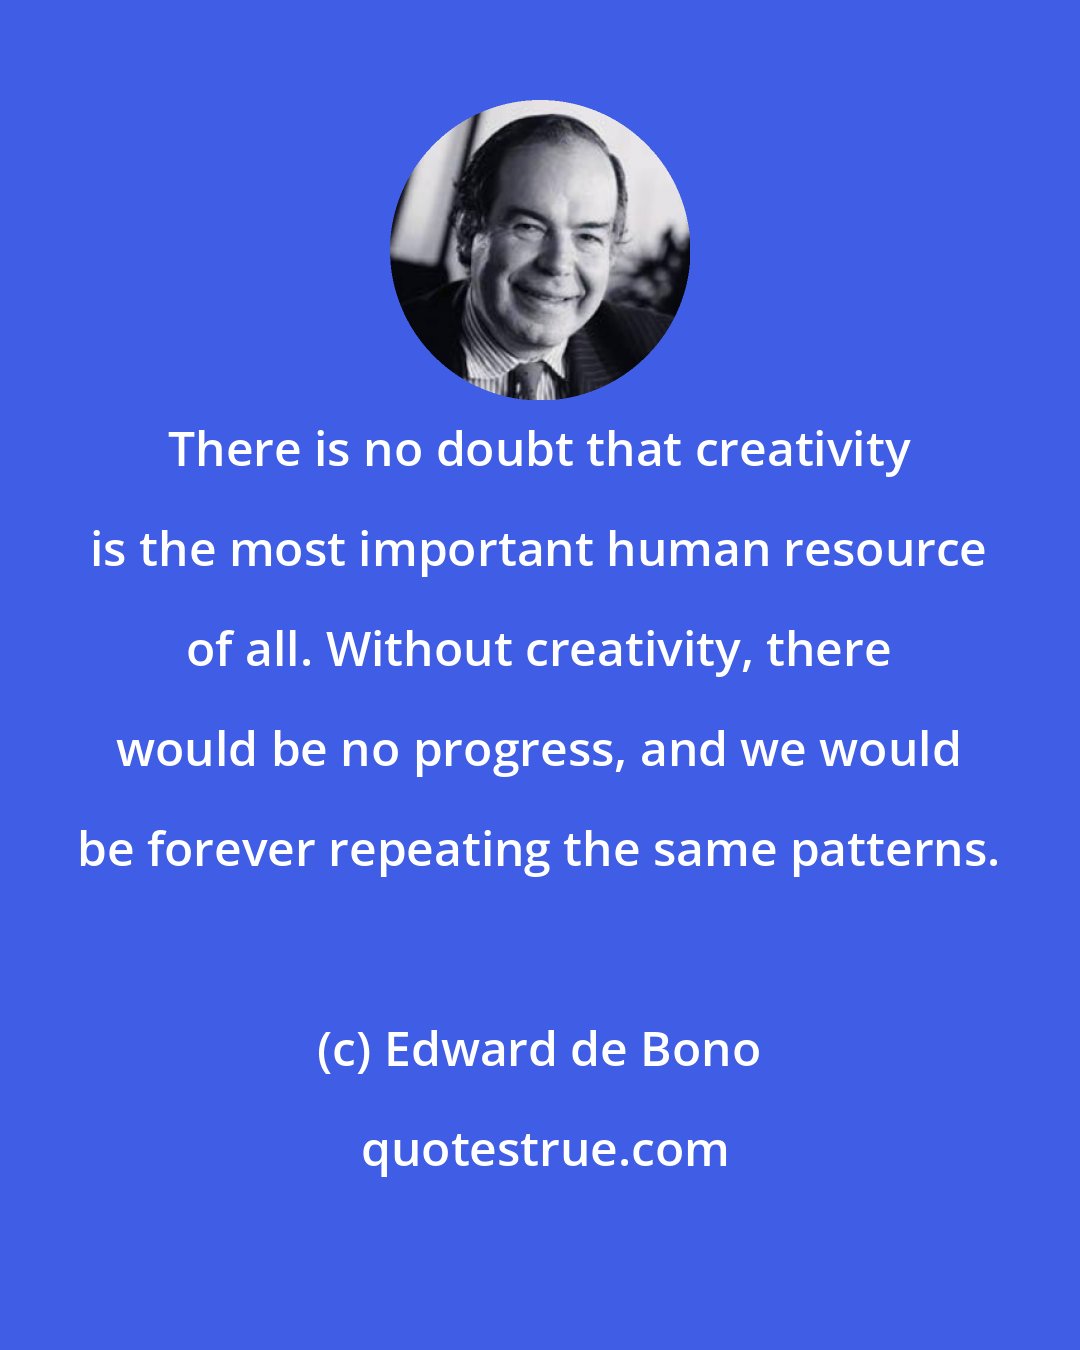 Edward de Bono: There is no doubt that creativity is the most important human resource of all. Without creativity, there would be no progress, and we would be forever repeating the same patterns.